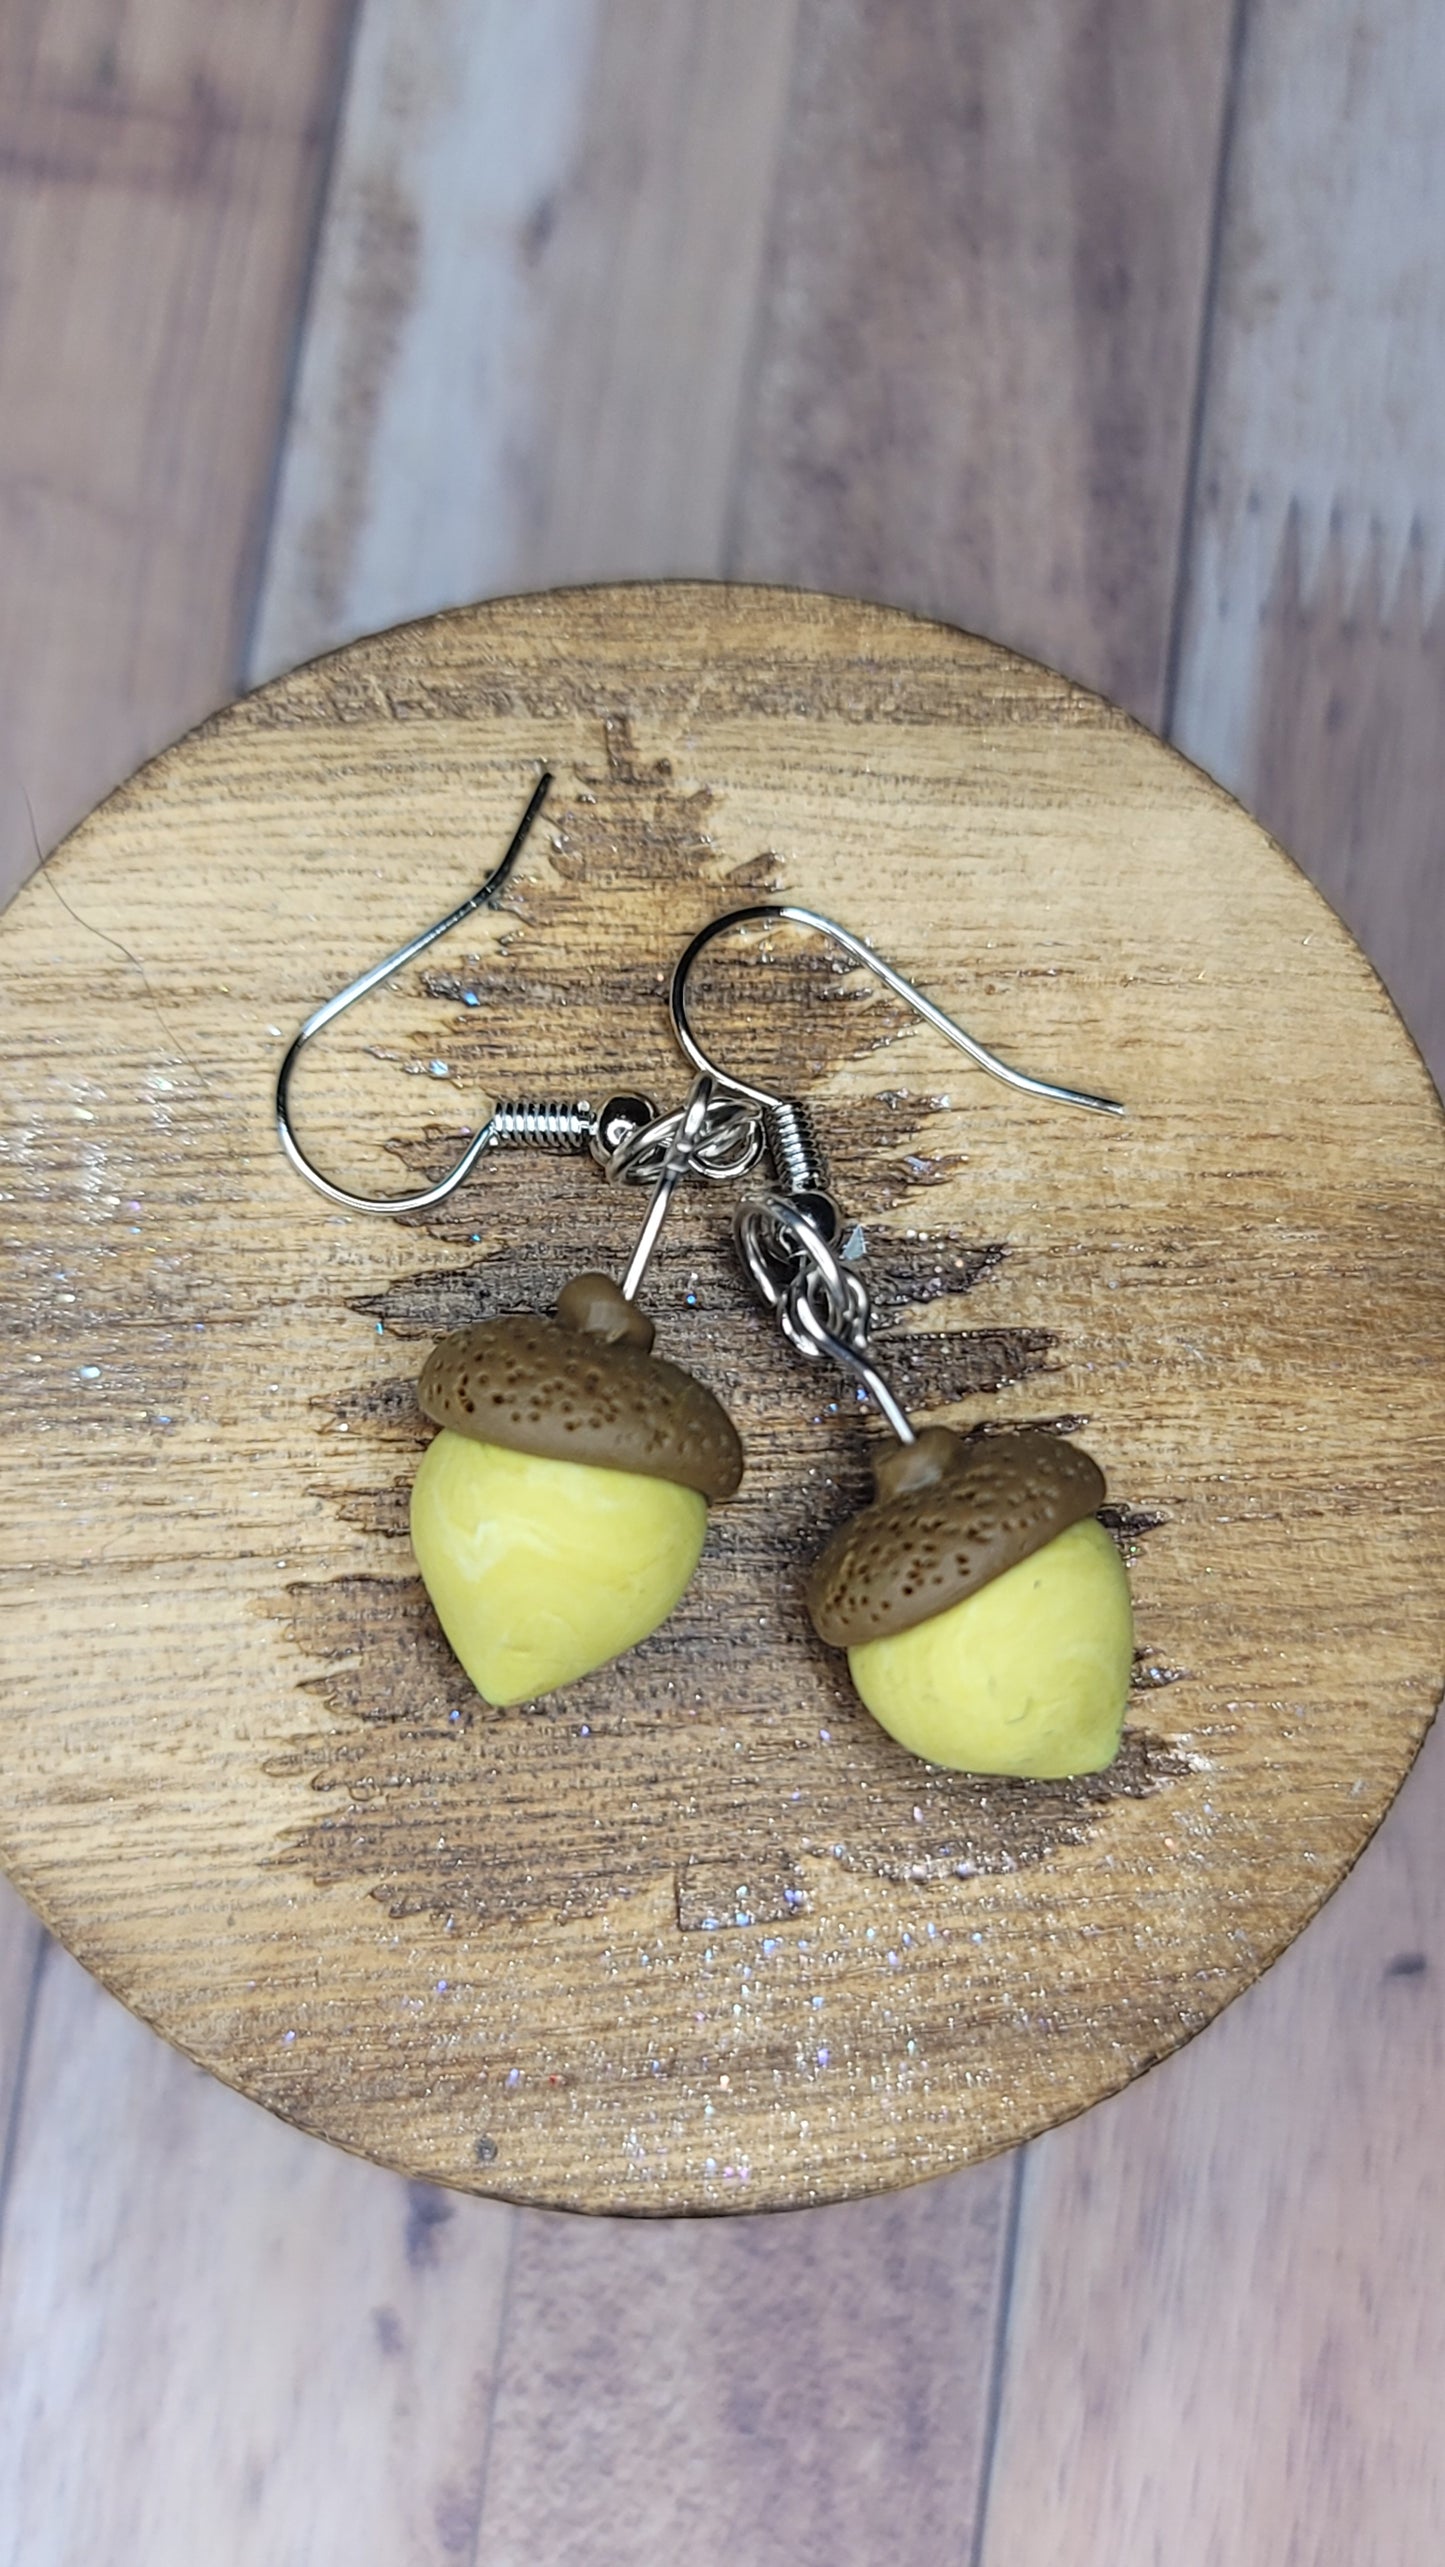 Polymer Clay Acorns Hand Crafted Earrings.  4 styles